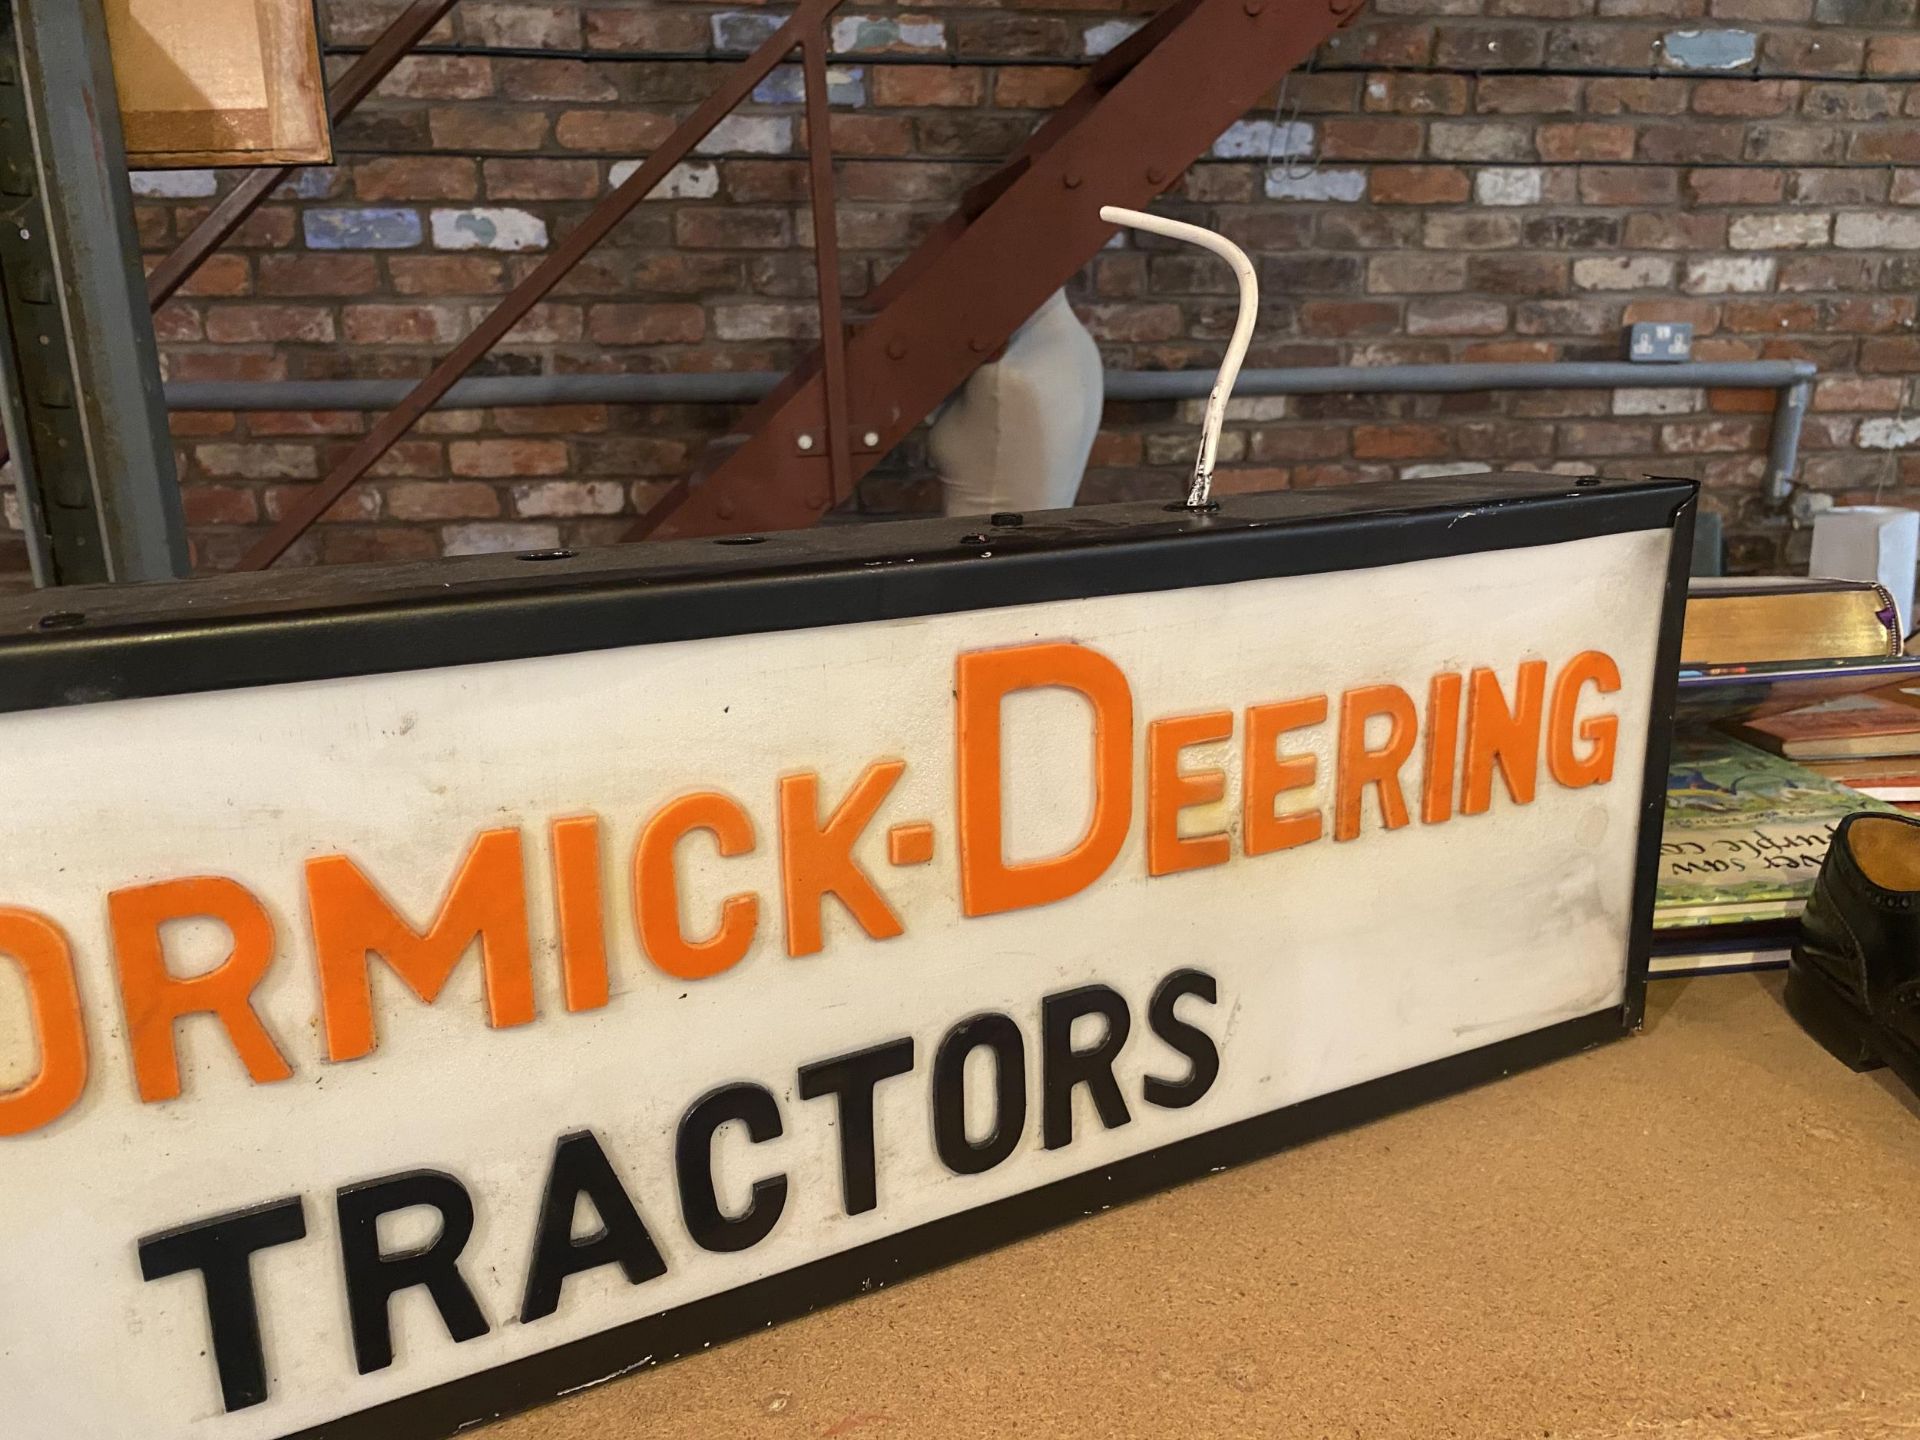 A McCORMICK-DEERING TRACTORS ILLUMINATED SIGN SIZE 85CM X 24.5CM - Image 3 of 4